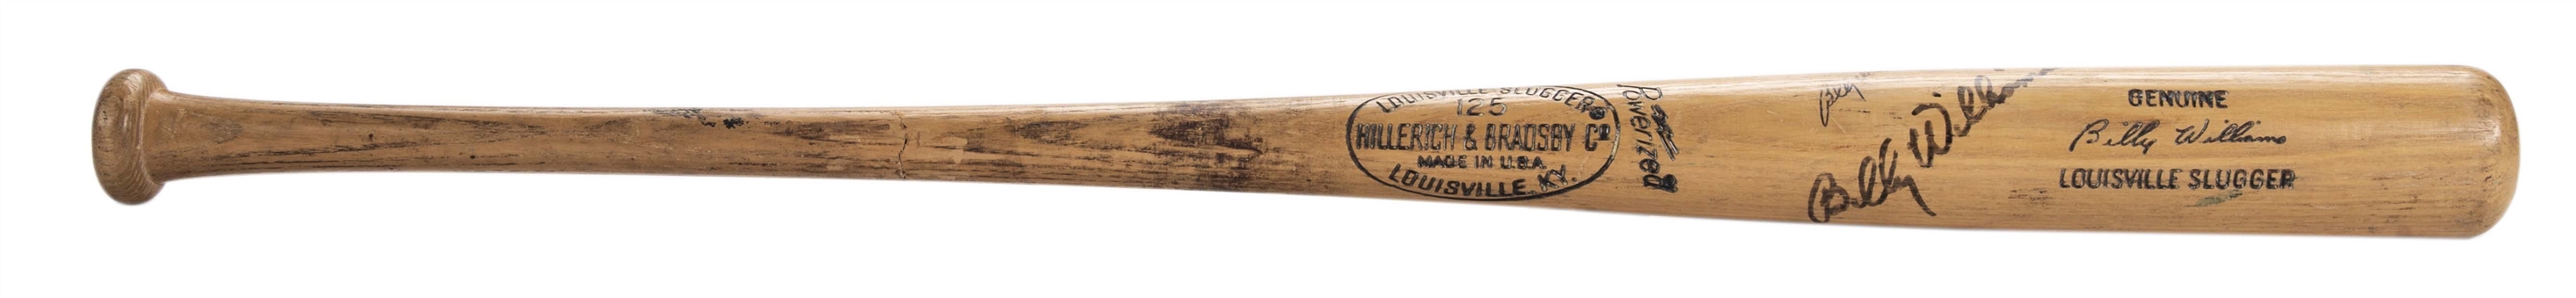 1975 Billy Williams Oakland Athletics Game Used And Signed Hillerich And Bradsby S2 Model Bat (PSA/DNA GU 8 & JSA)